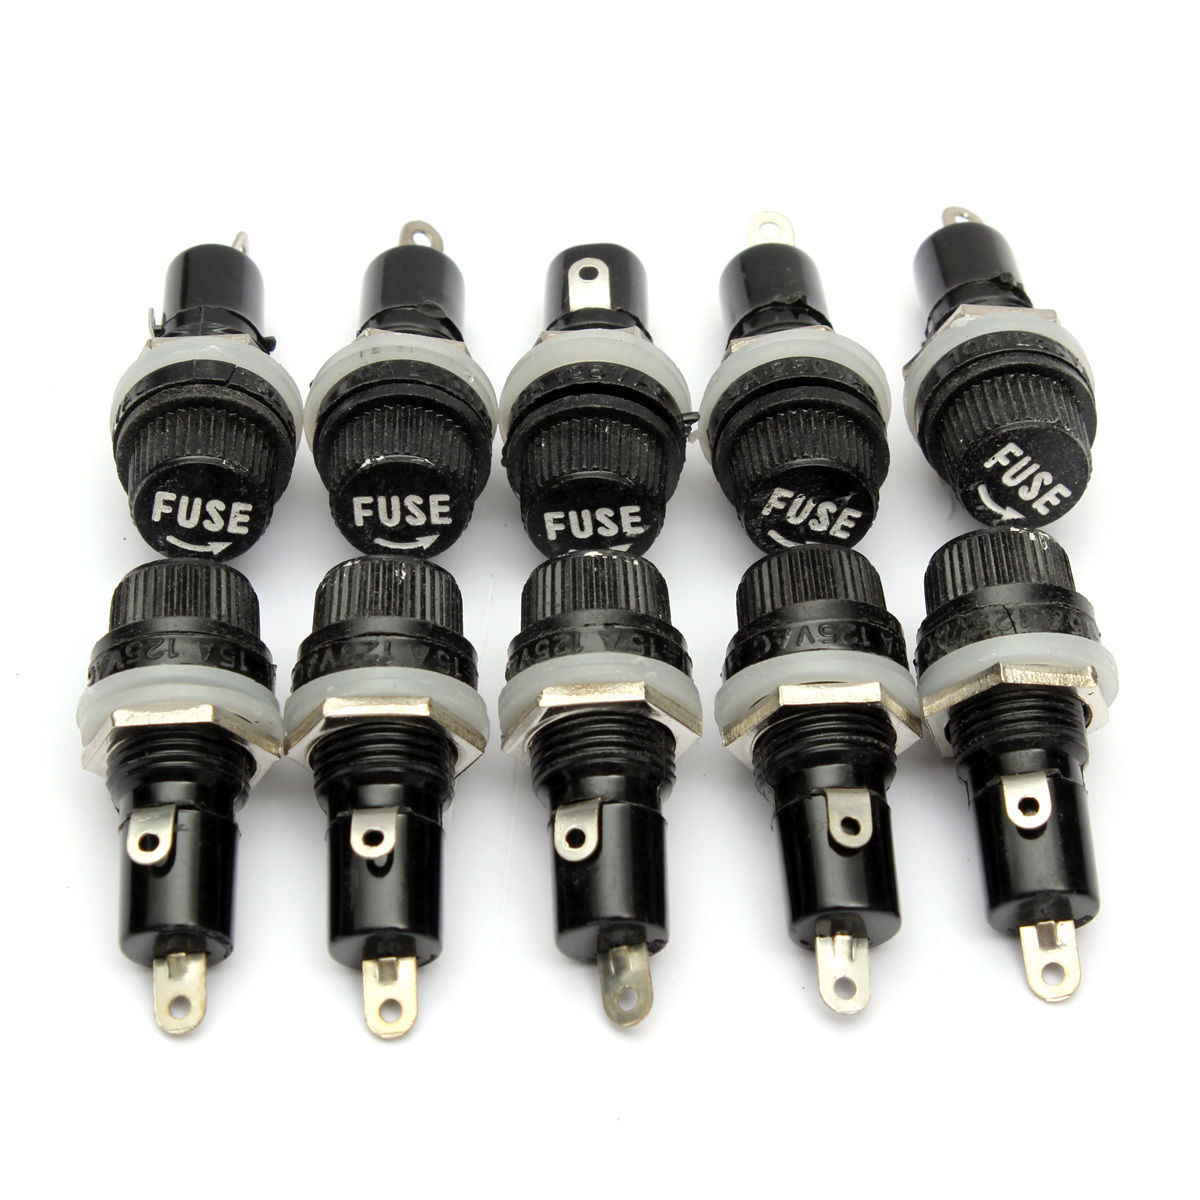 10pcs Electrical Panel Mounted Glass Fuse Holder For Radio Auto Stereo 5x20mm 1